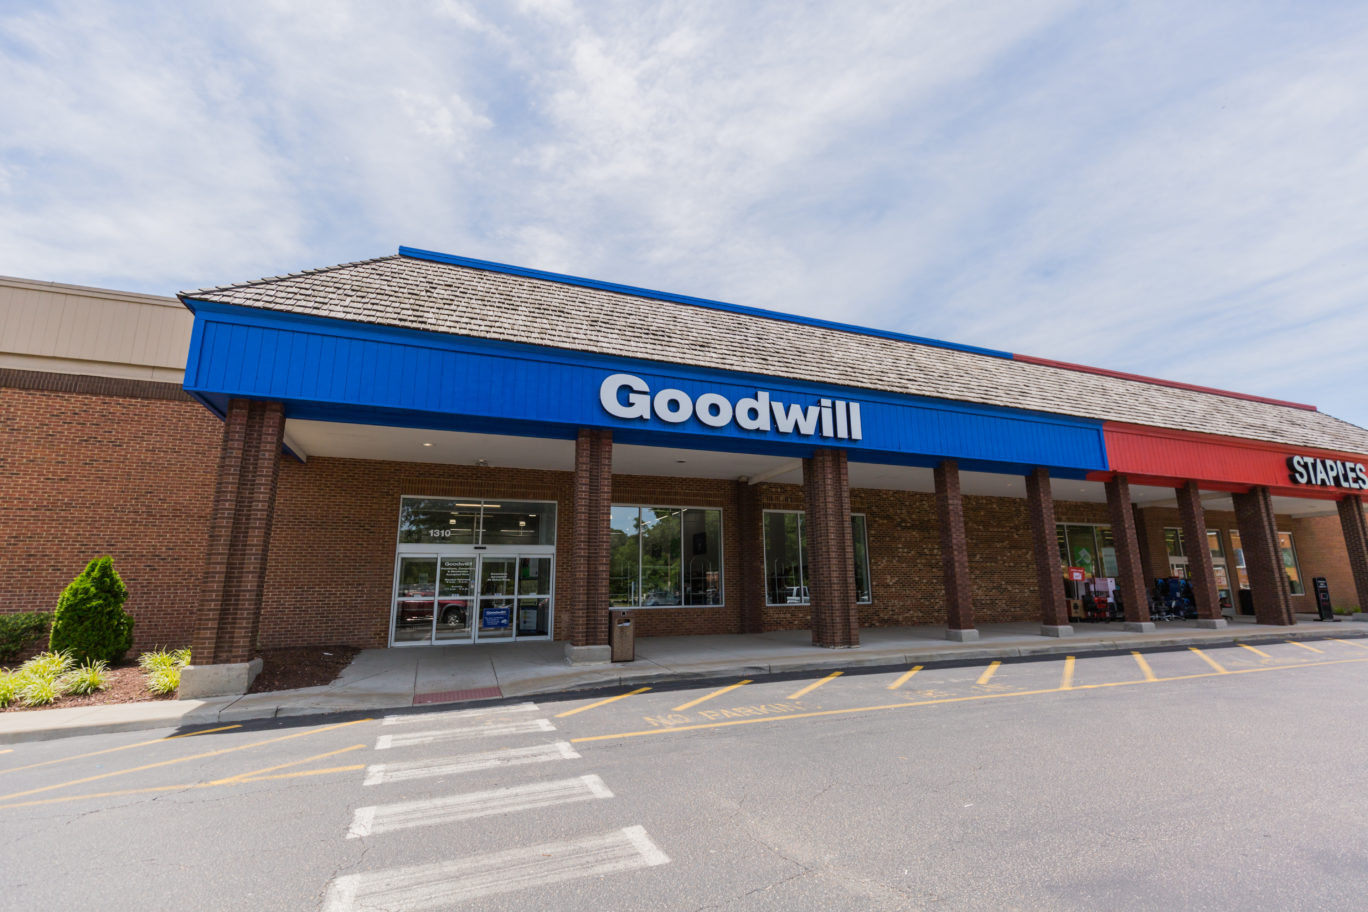 Williamsburg Retail Store - Goodwill of Central and Coastal VA